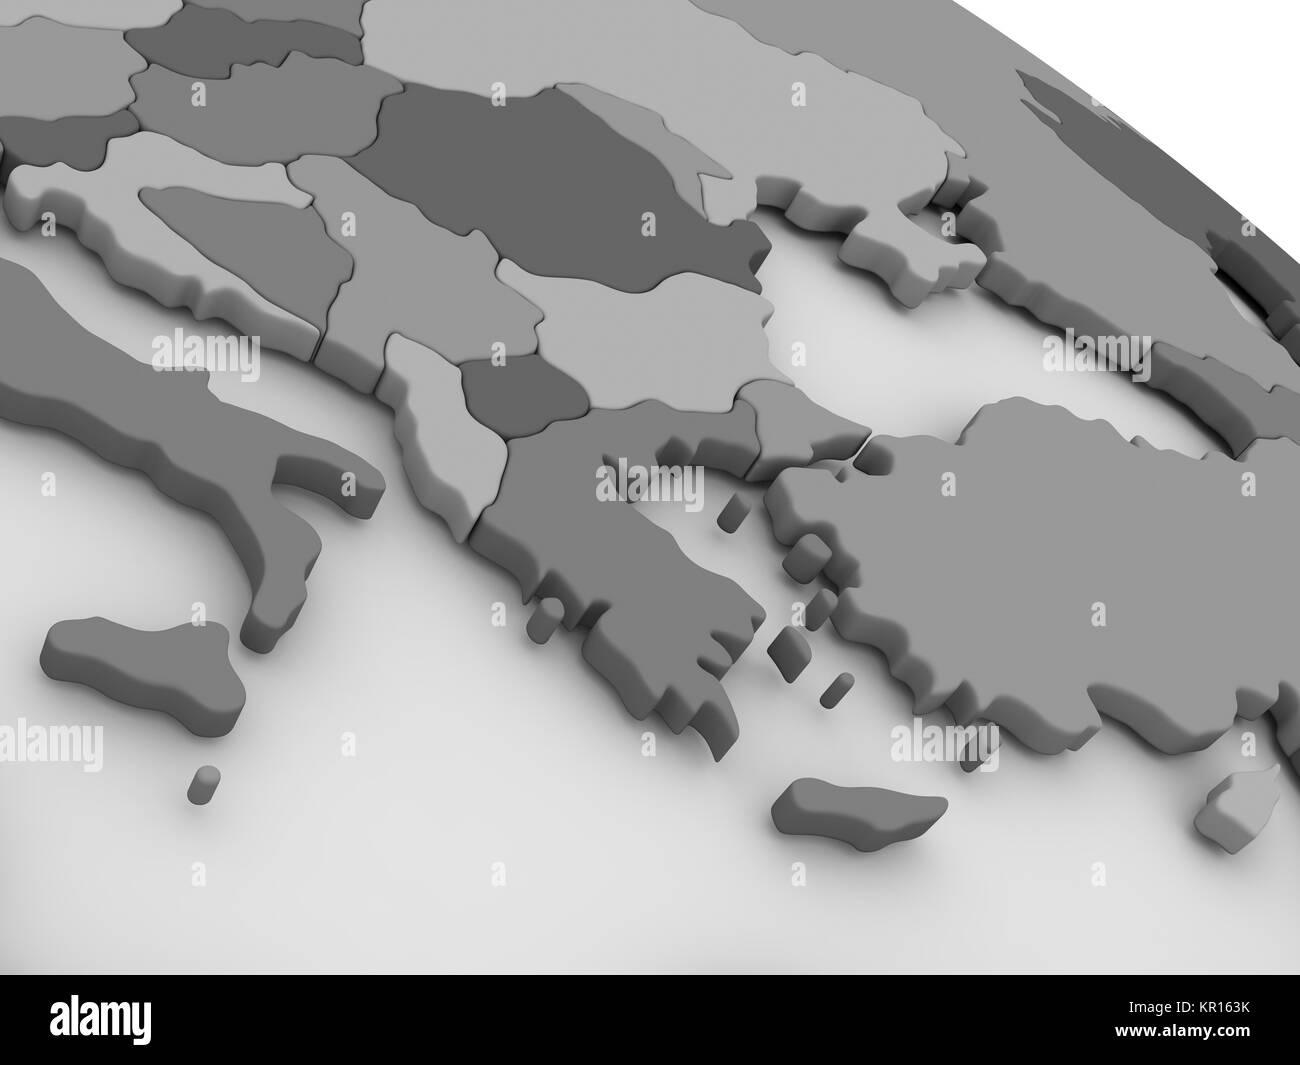 Greece on grey 3D map Stock Photo